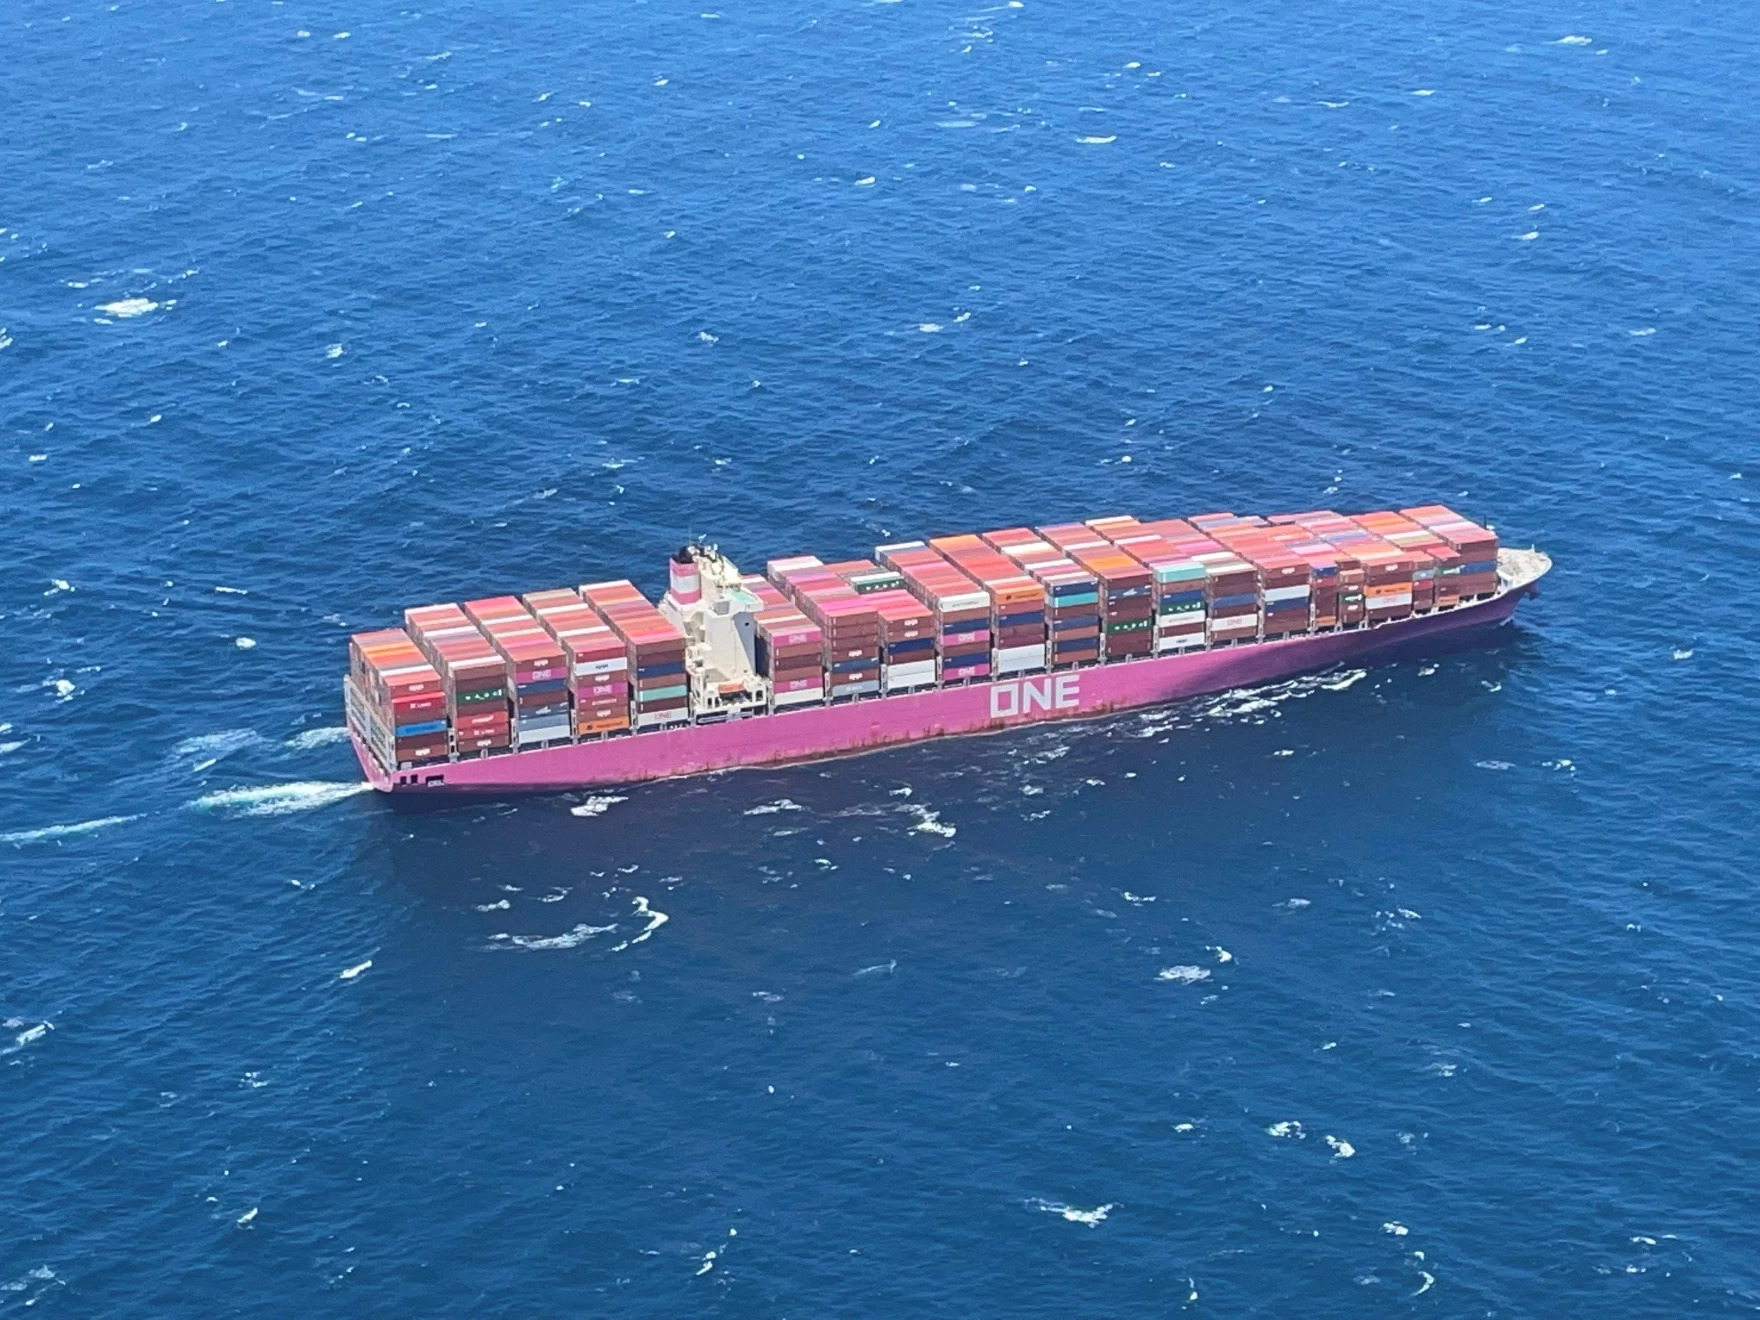 an ariel view of a large container ship making its way through the ocean